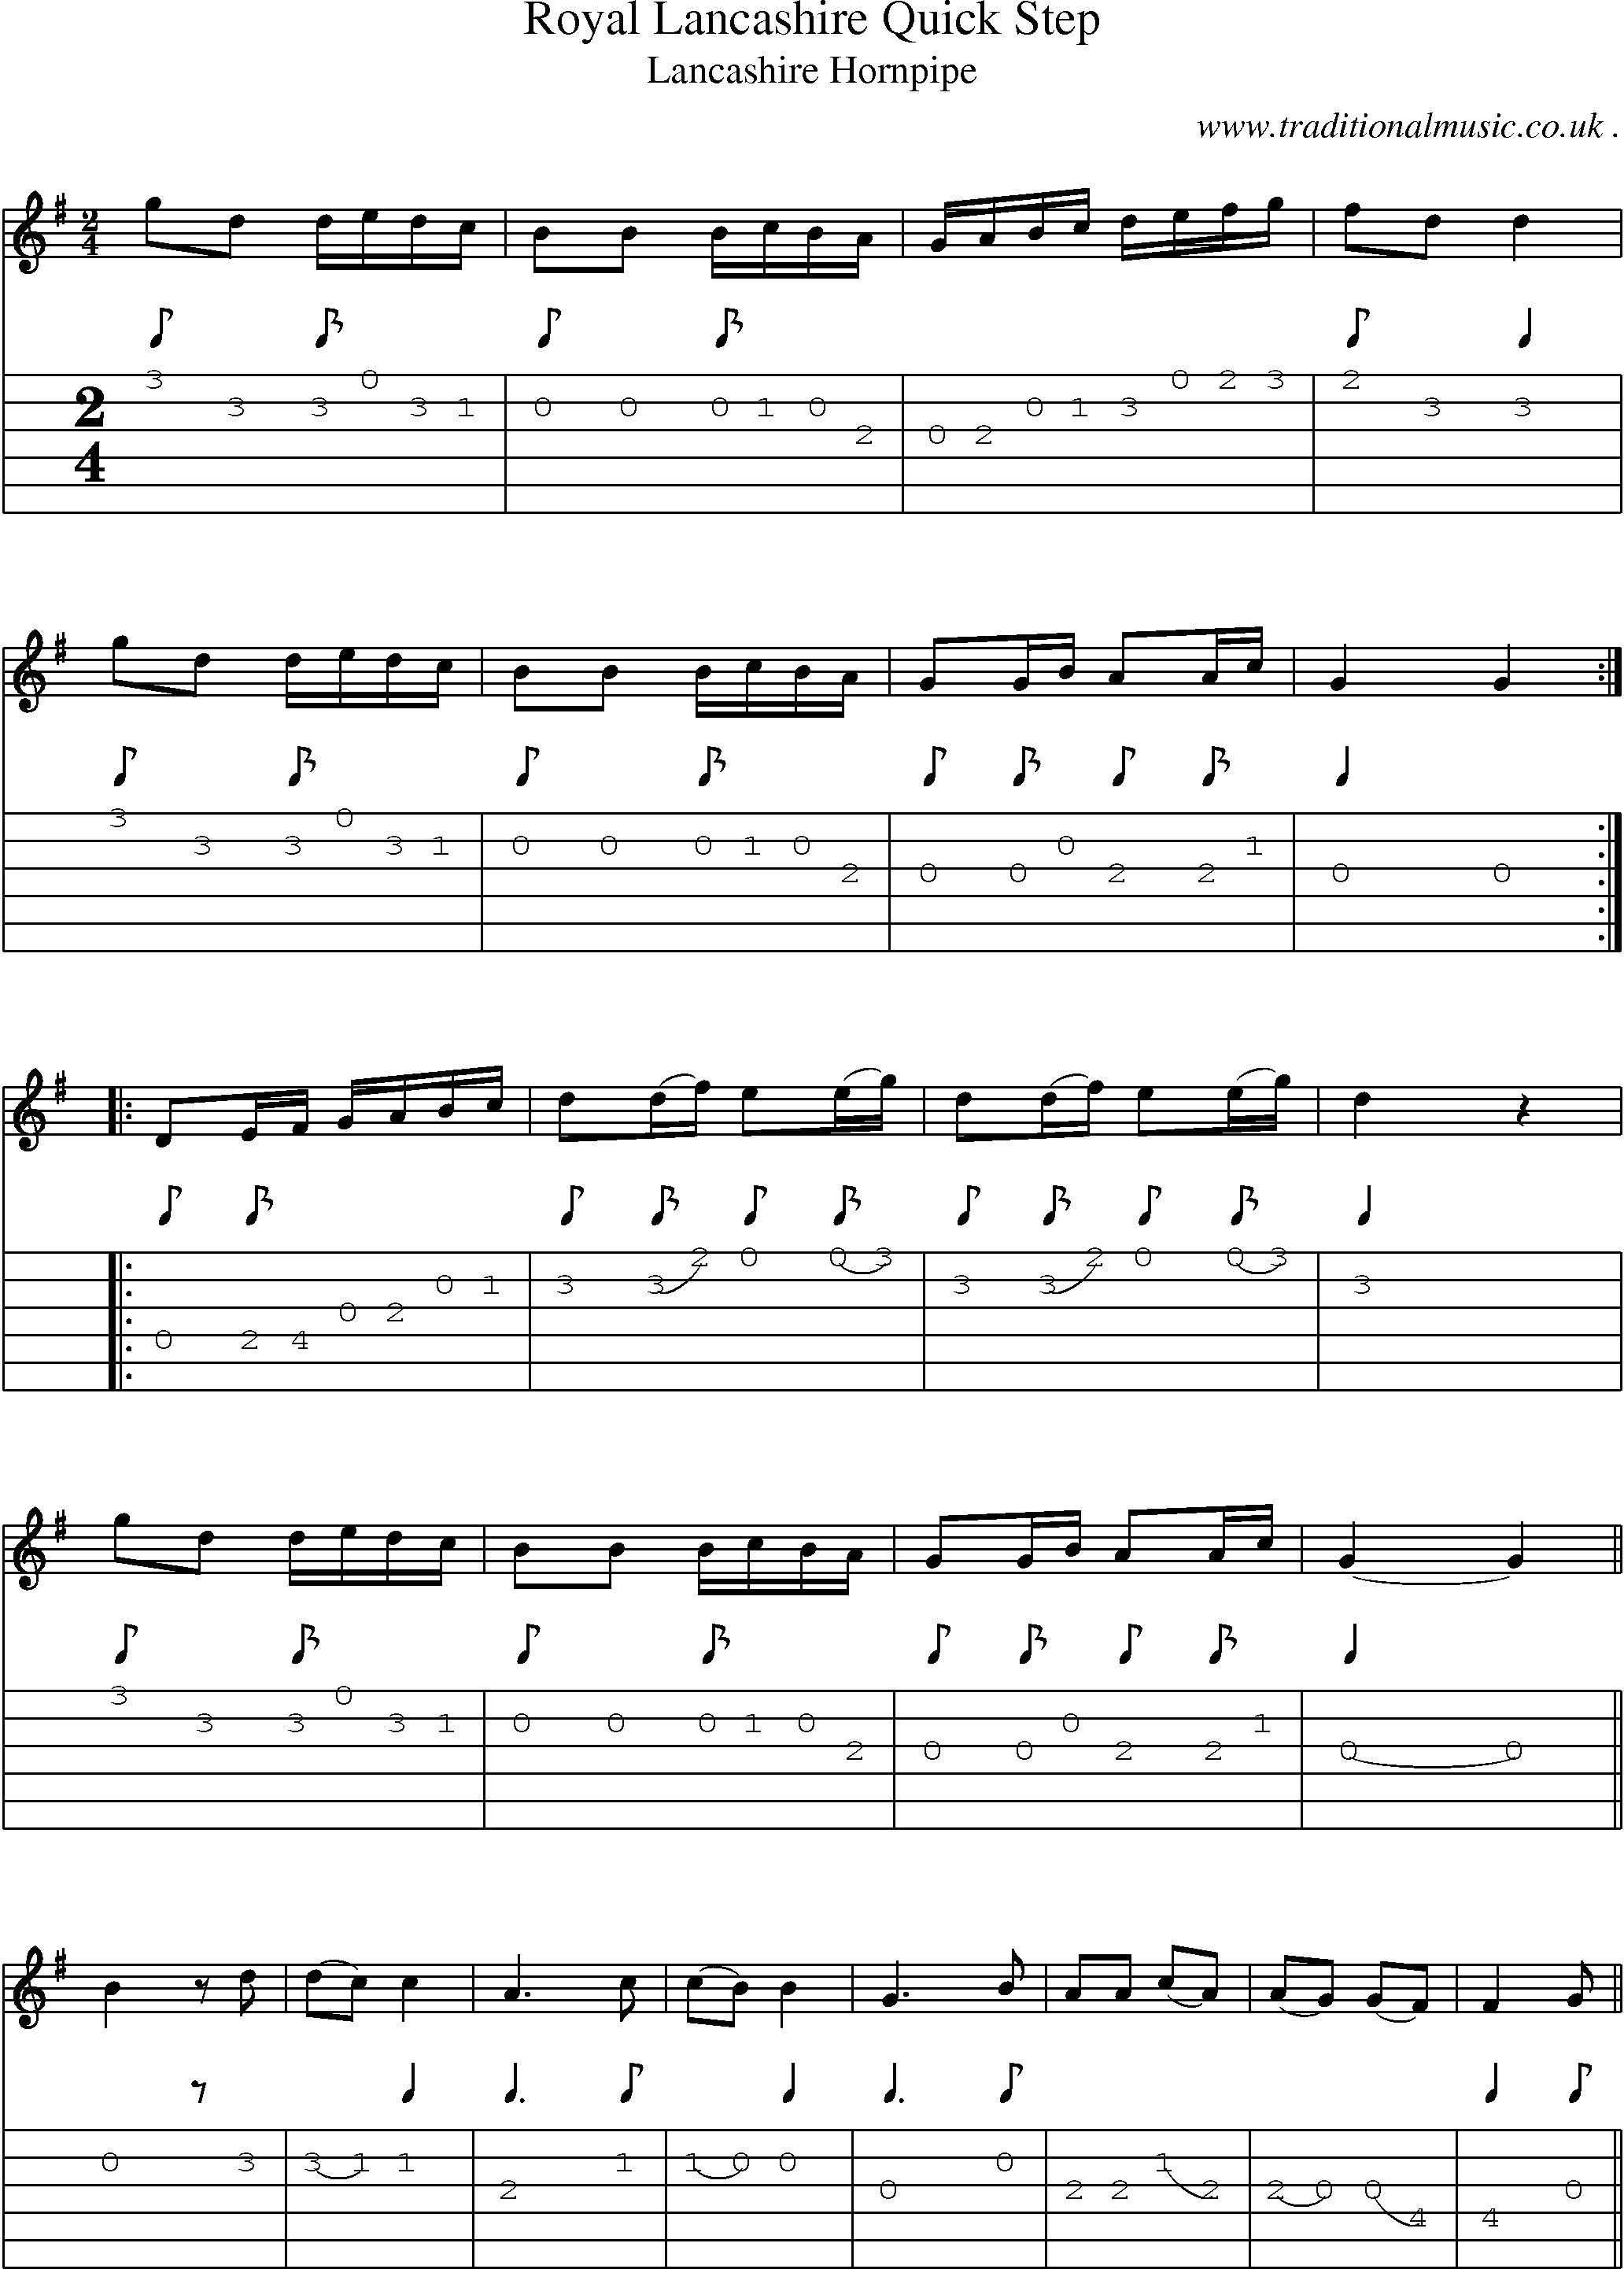 Sheet-Music and Guitar Tabs for Royal Lancashire Quick Step